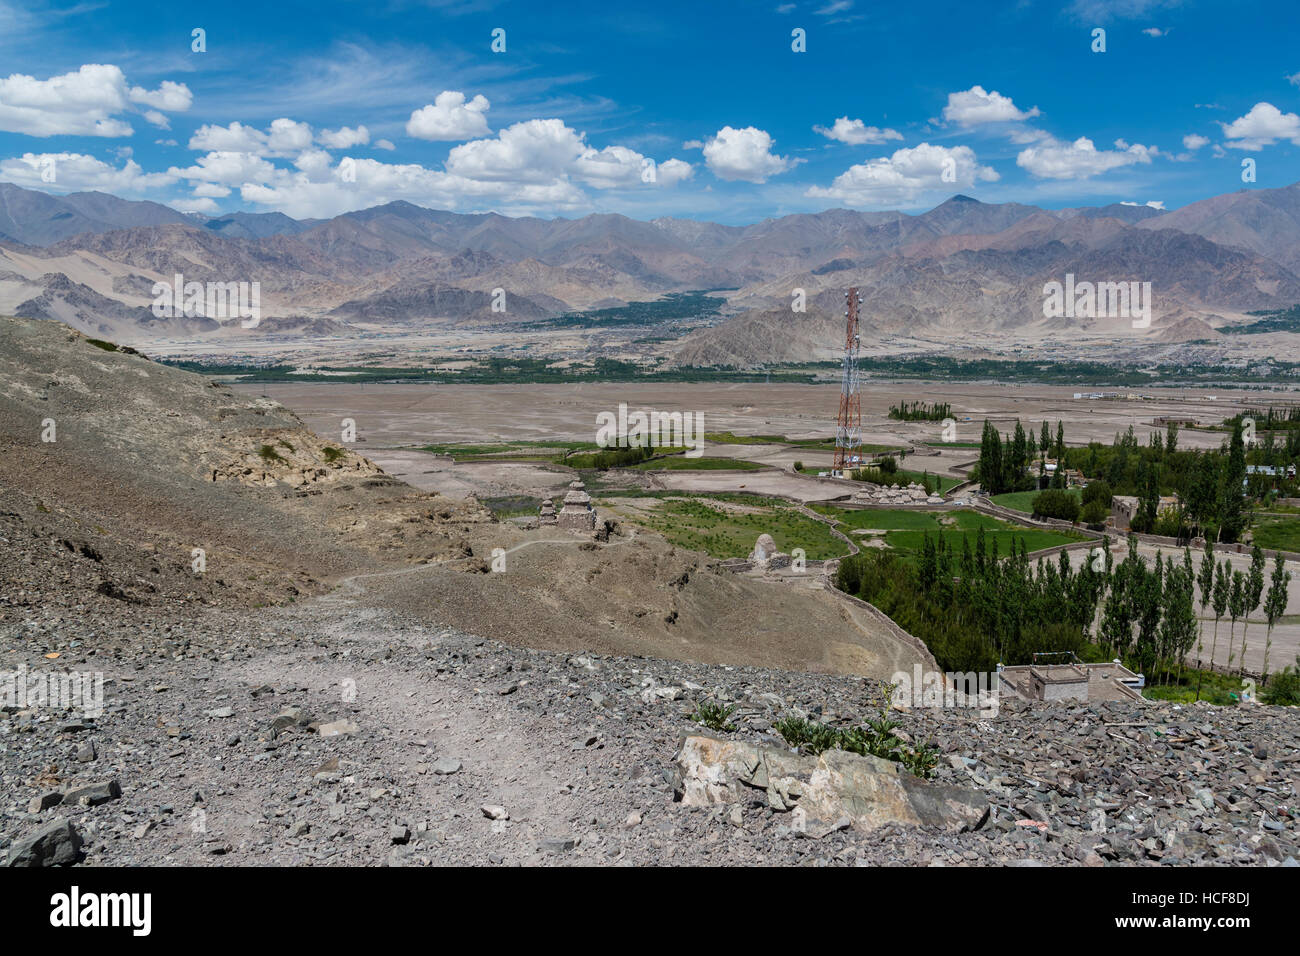 Ladakh landscape showing human settlement and Himalayan mountains in the background Stock Photo